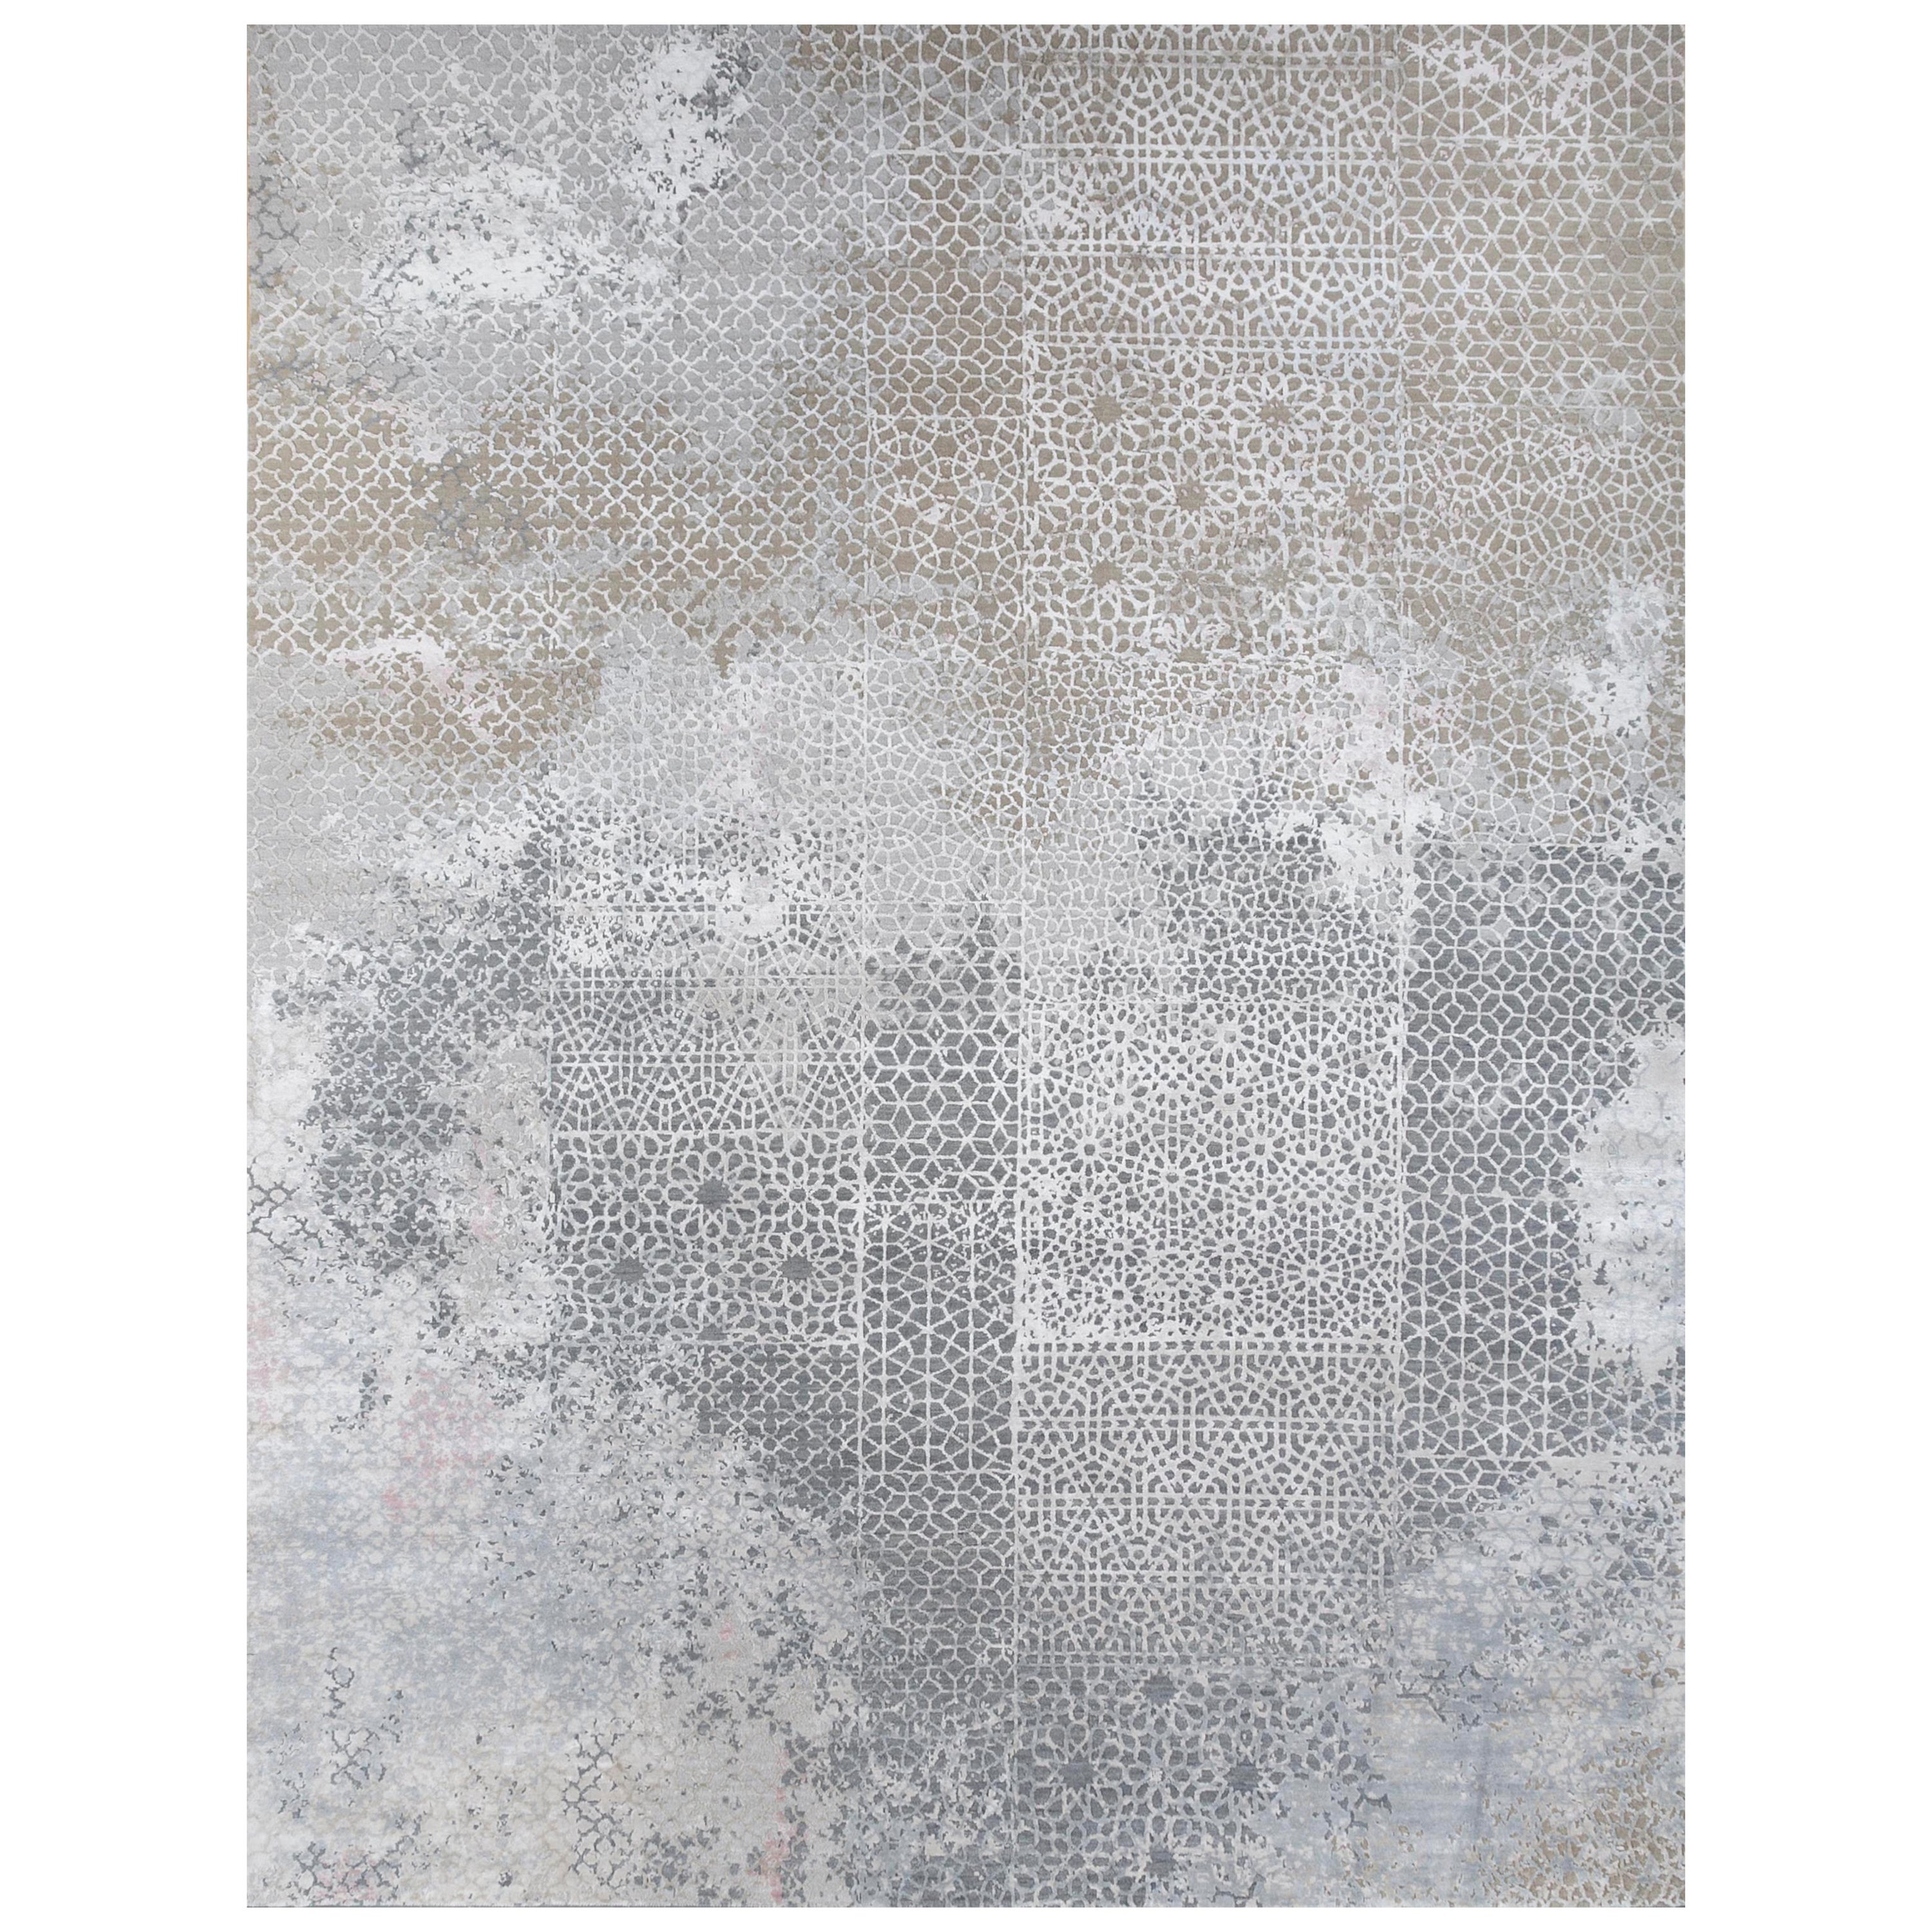 Earthy Elegance Medium Gray & Warm Taupe 240X300 cm Handknotted Rug For Sale